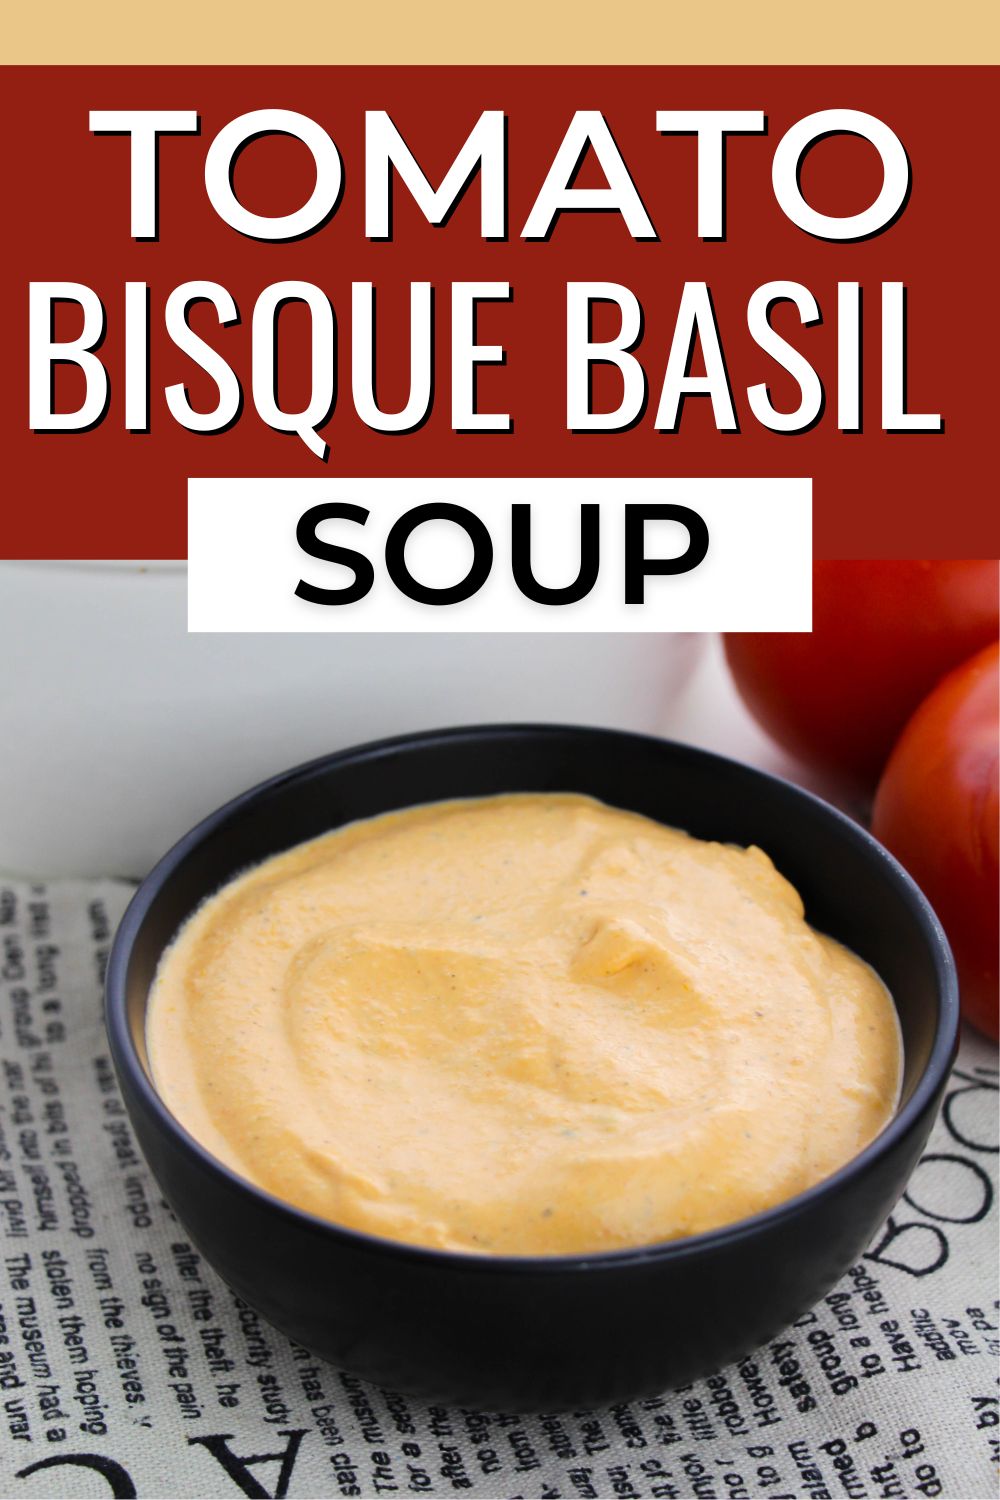 Tomato bisque soup with basil.